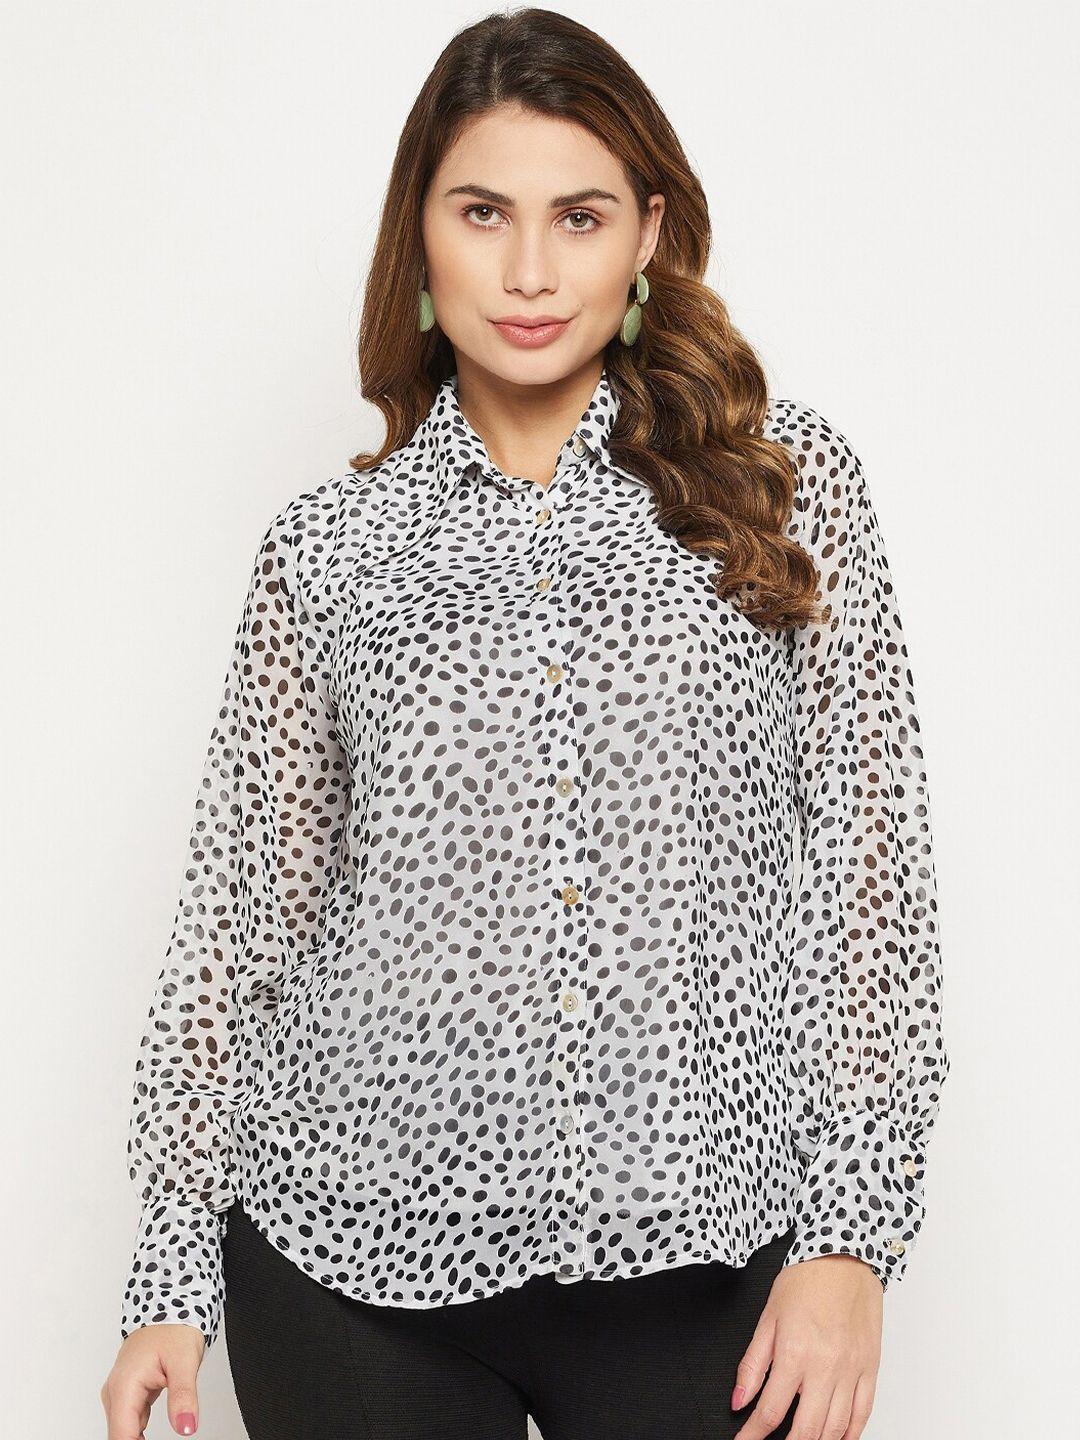 bitterlime-relaxed-button-cuff-printed-georgette-casual-shirt